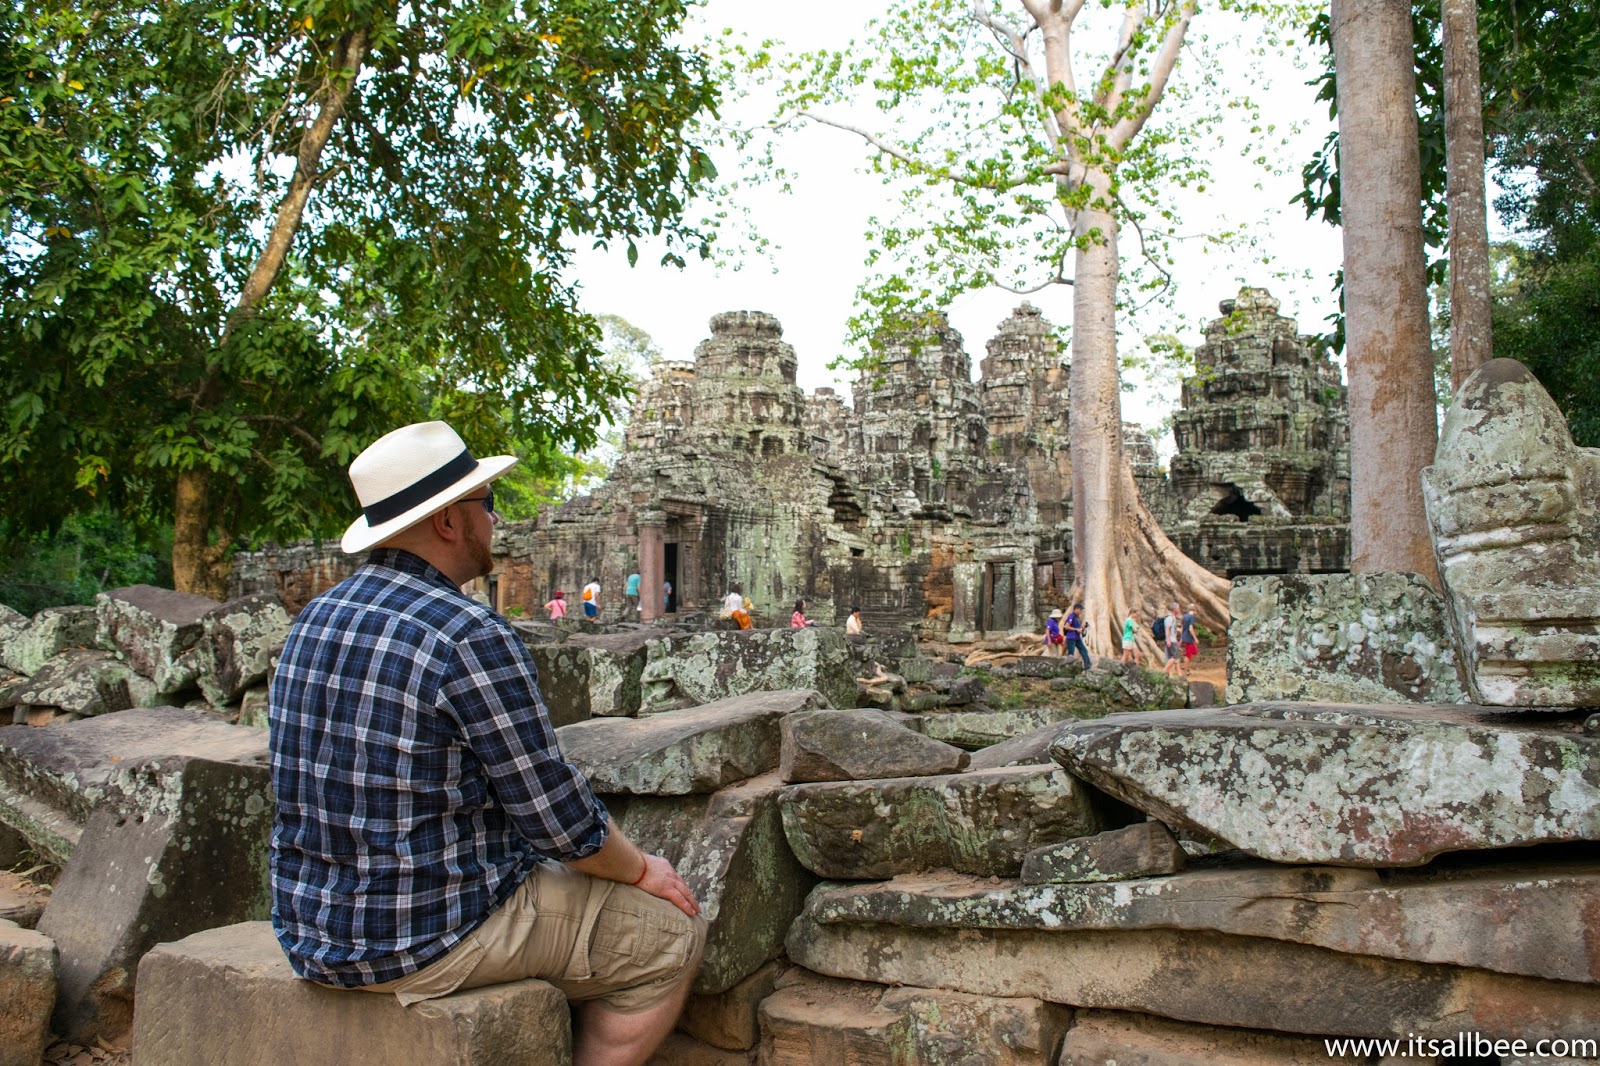 Exploring Cambodia's Banteay Kdei Temple In Siem Reap - A Citadel of Chambers